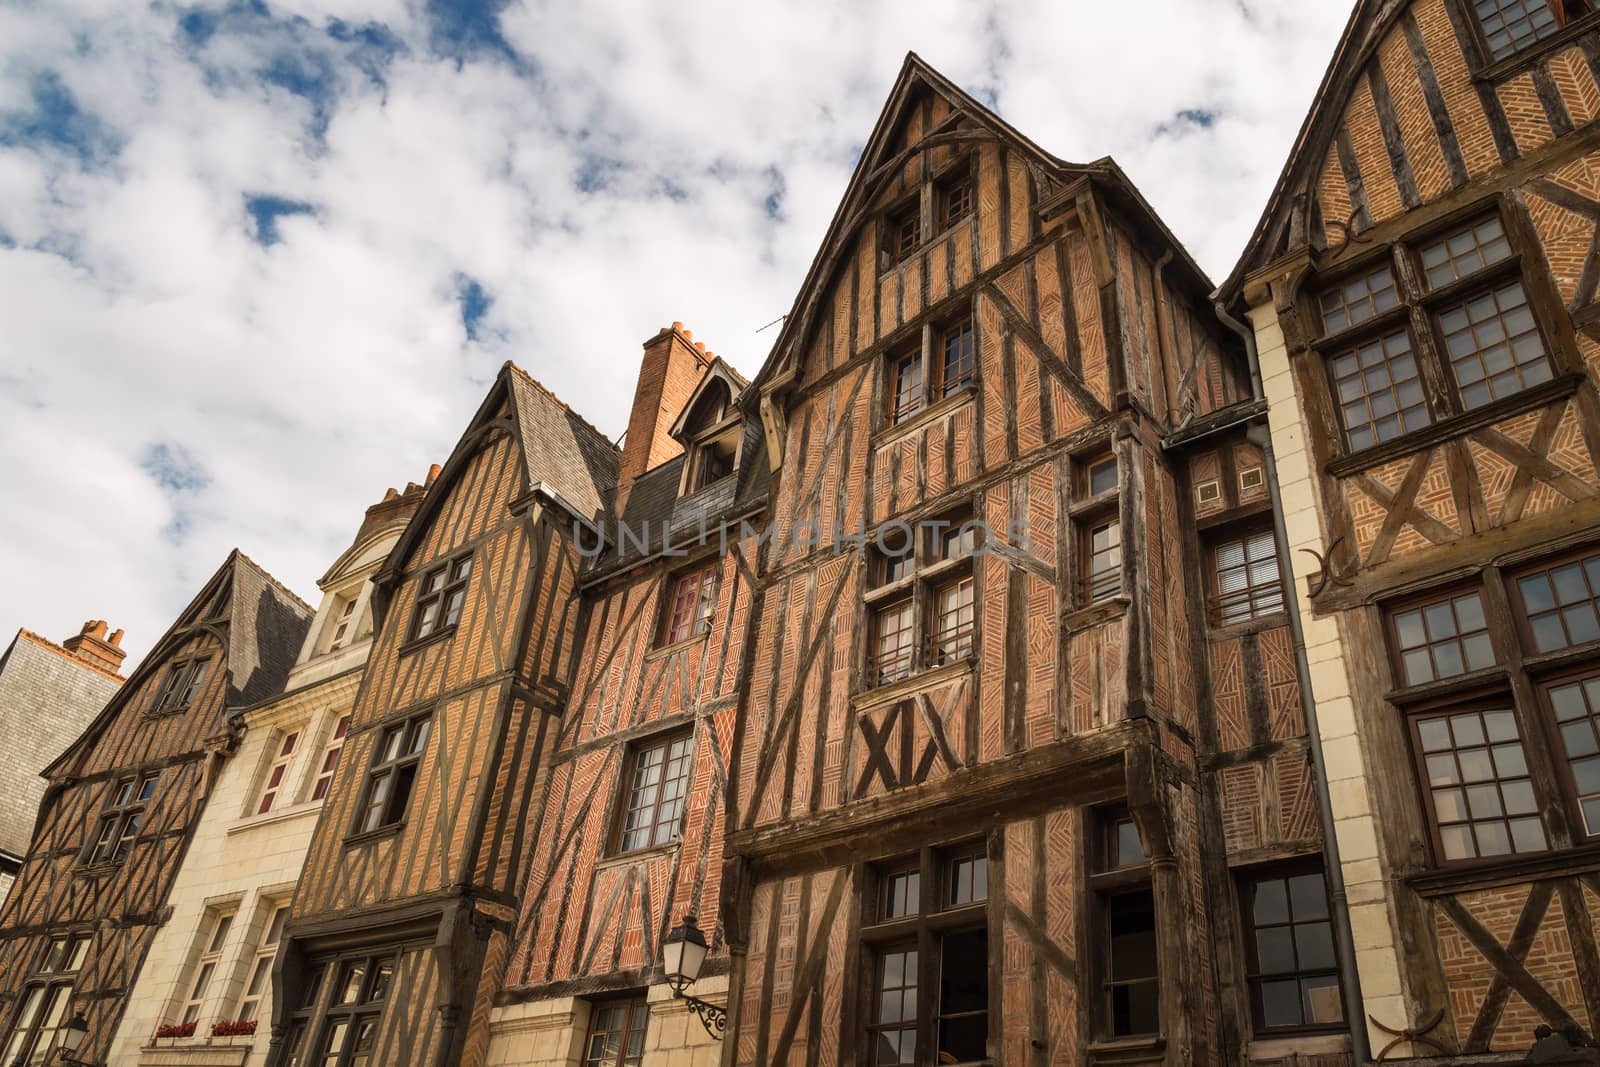 Picturesque half-timbered houses in Tours, France by anikasalsera